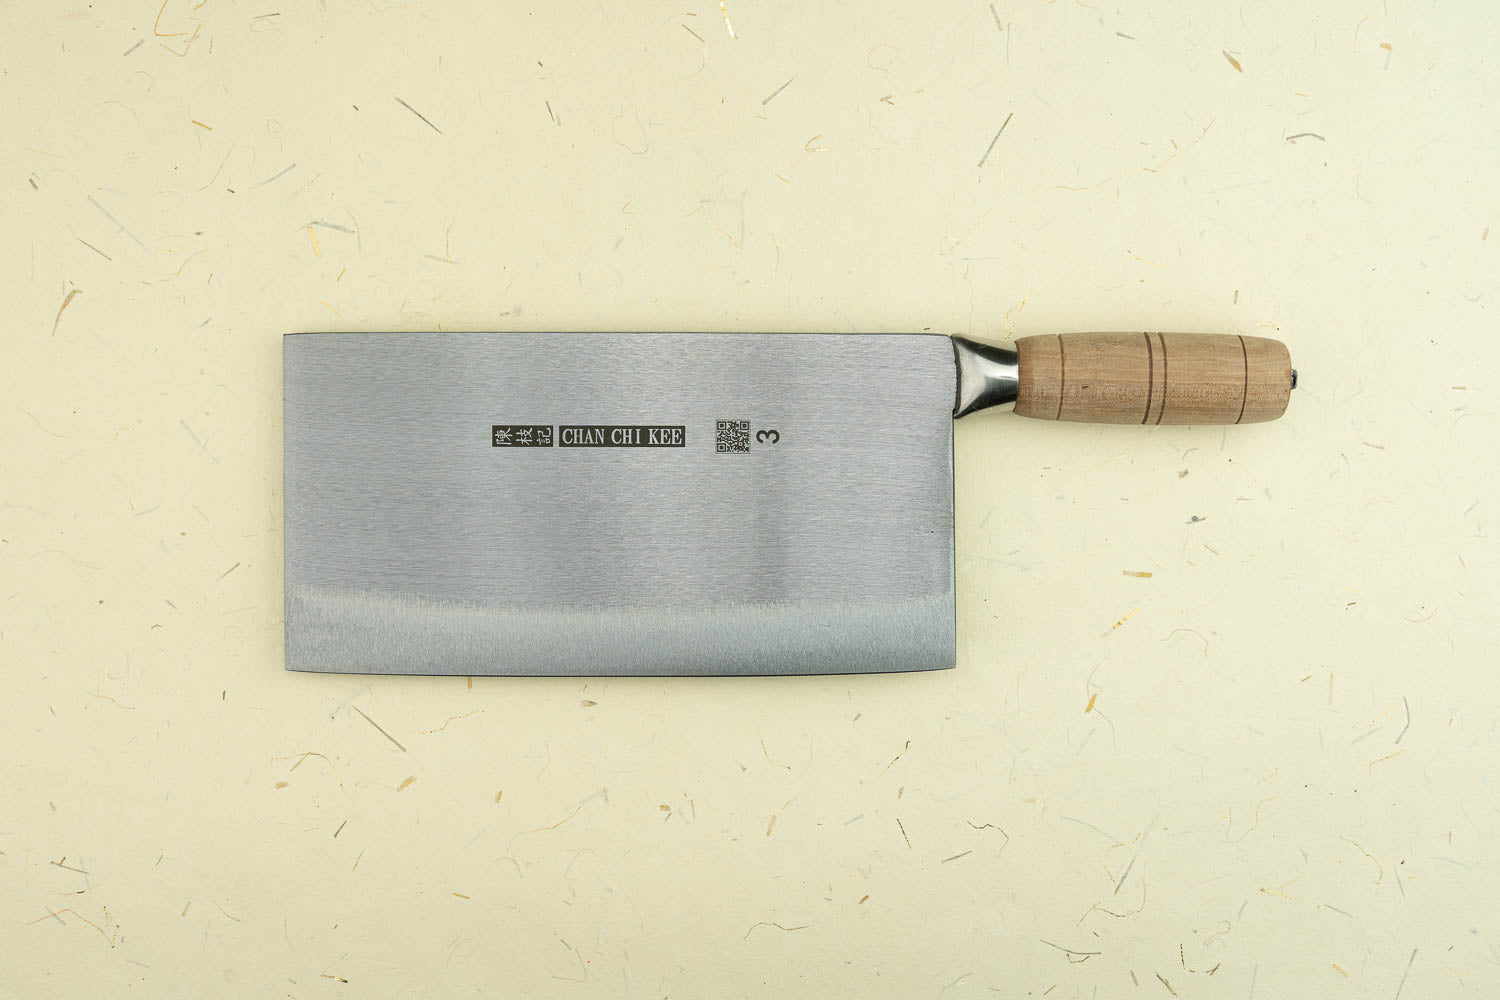 CCK Cleaver "Civil and Military" Kitchen Chopper Knife 215mm - KF1203